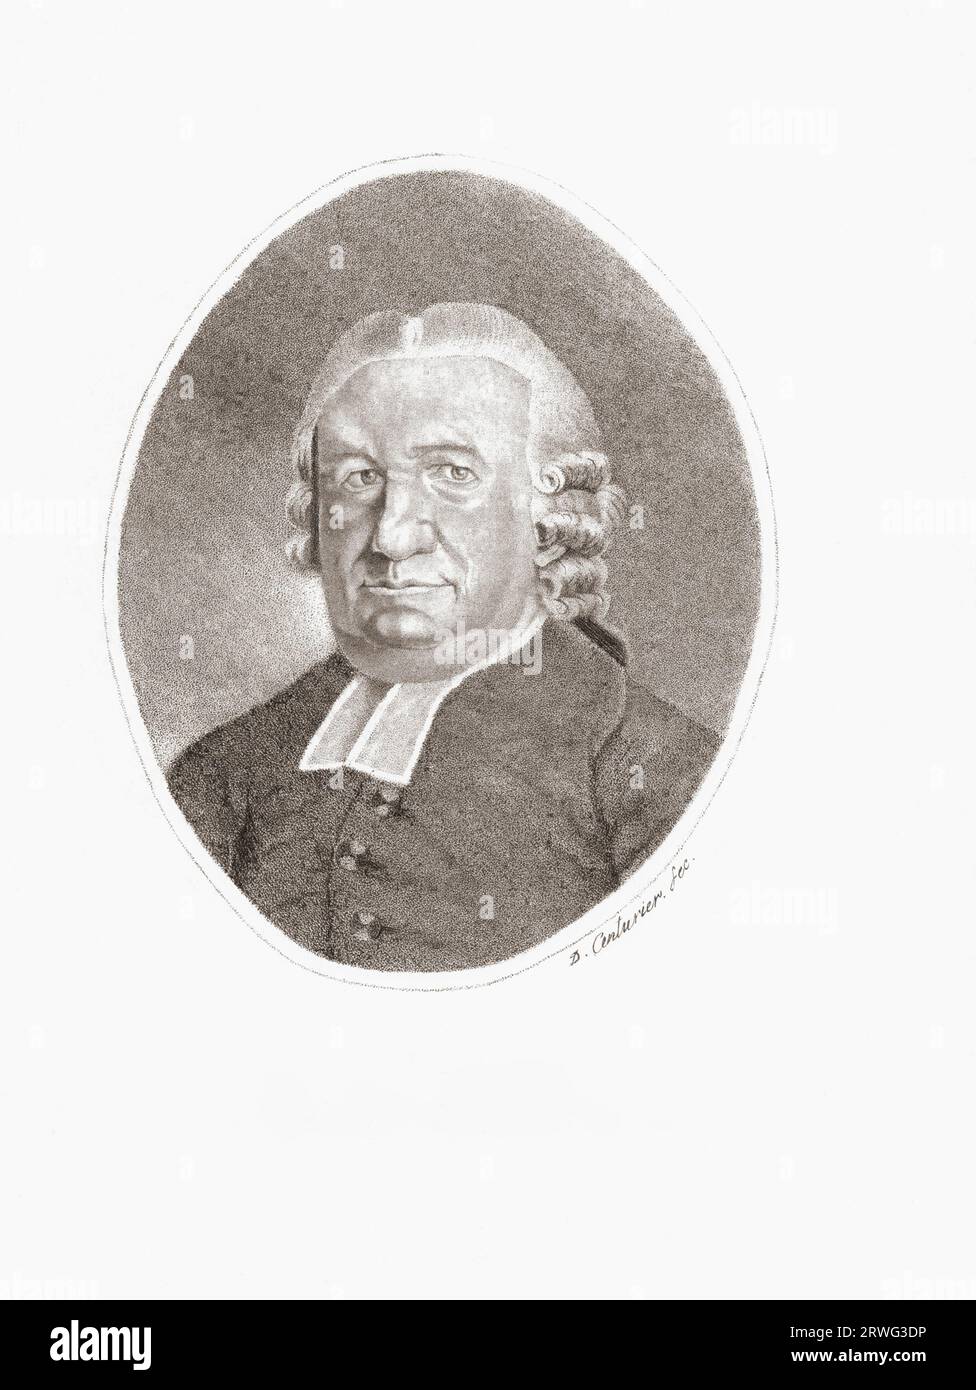 Jean Piere Erman, 1735 - 1814. German theologian, historian and official in Berlin. After an engraving by D Centurier. Stock Photo